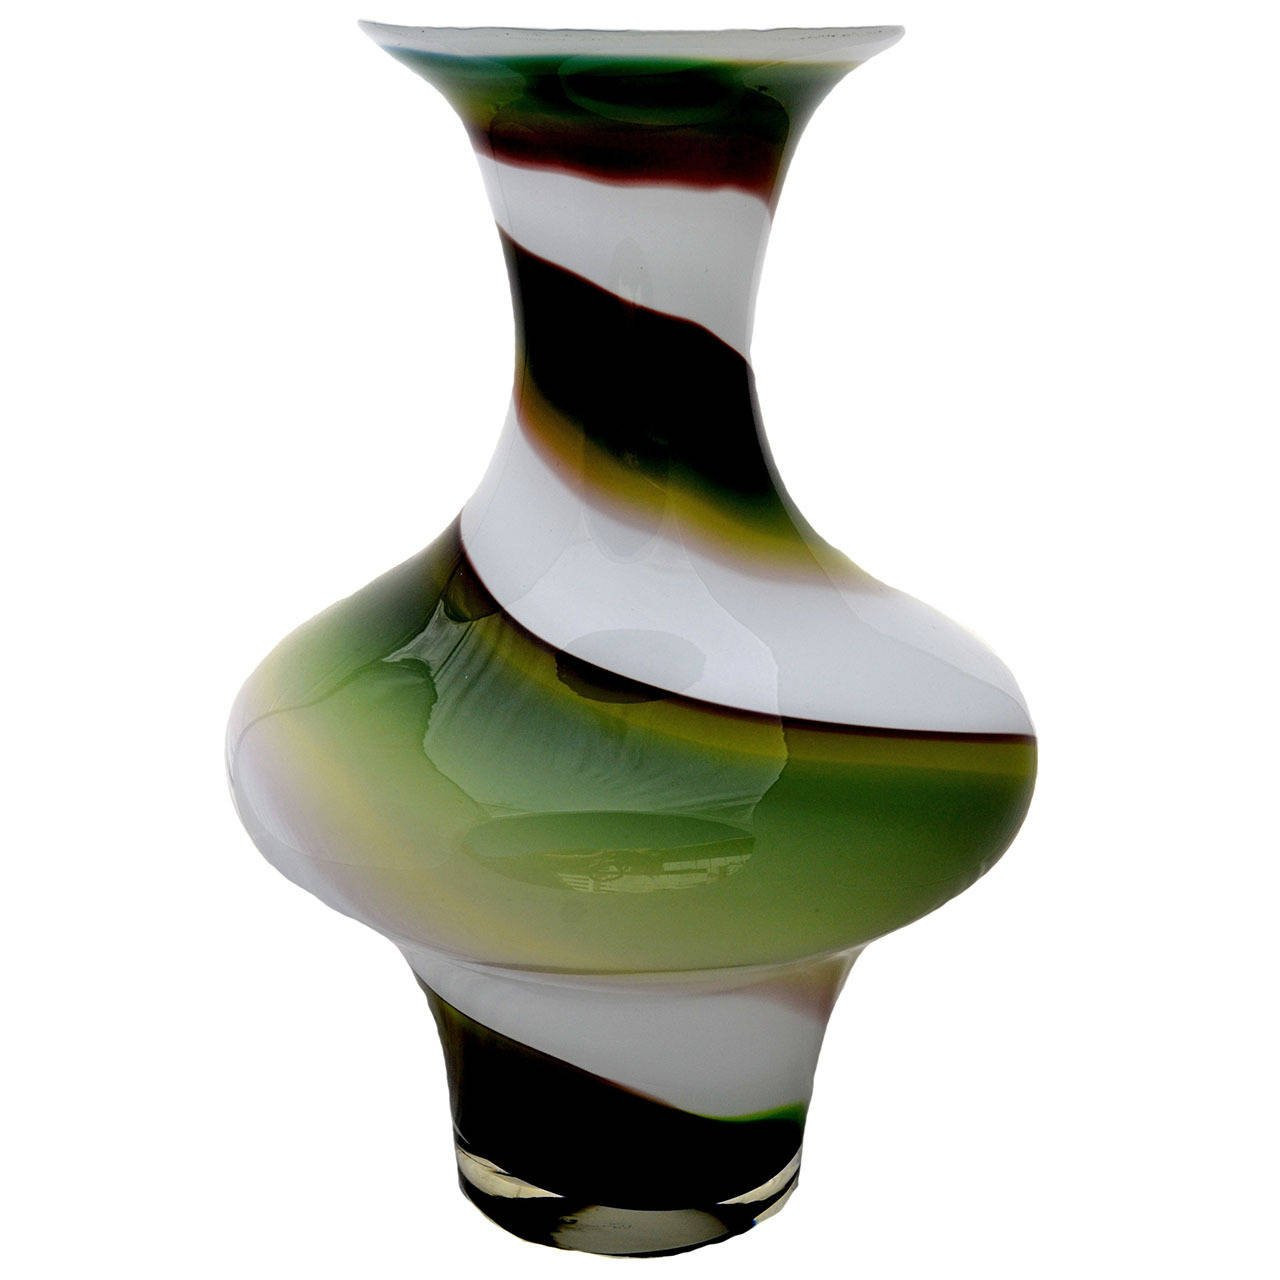 20 attractive Murano Glass Vase Blue Green 2024 free download murano glass vase blue green of large and heavy 1970s german emerald green bubble ice glass vase with regard to large green and white swirl art glass vase